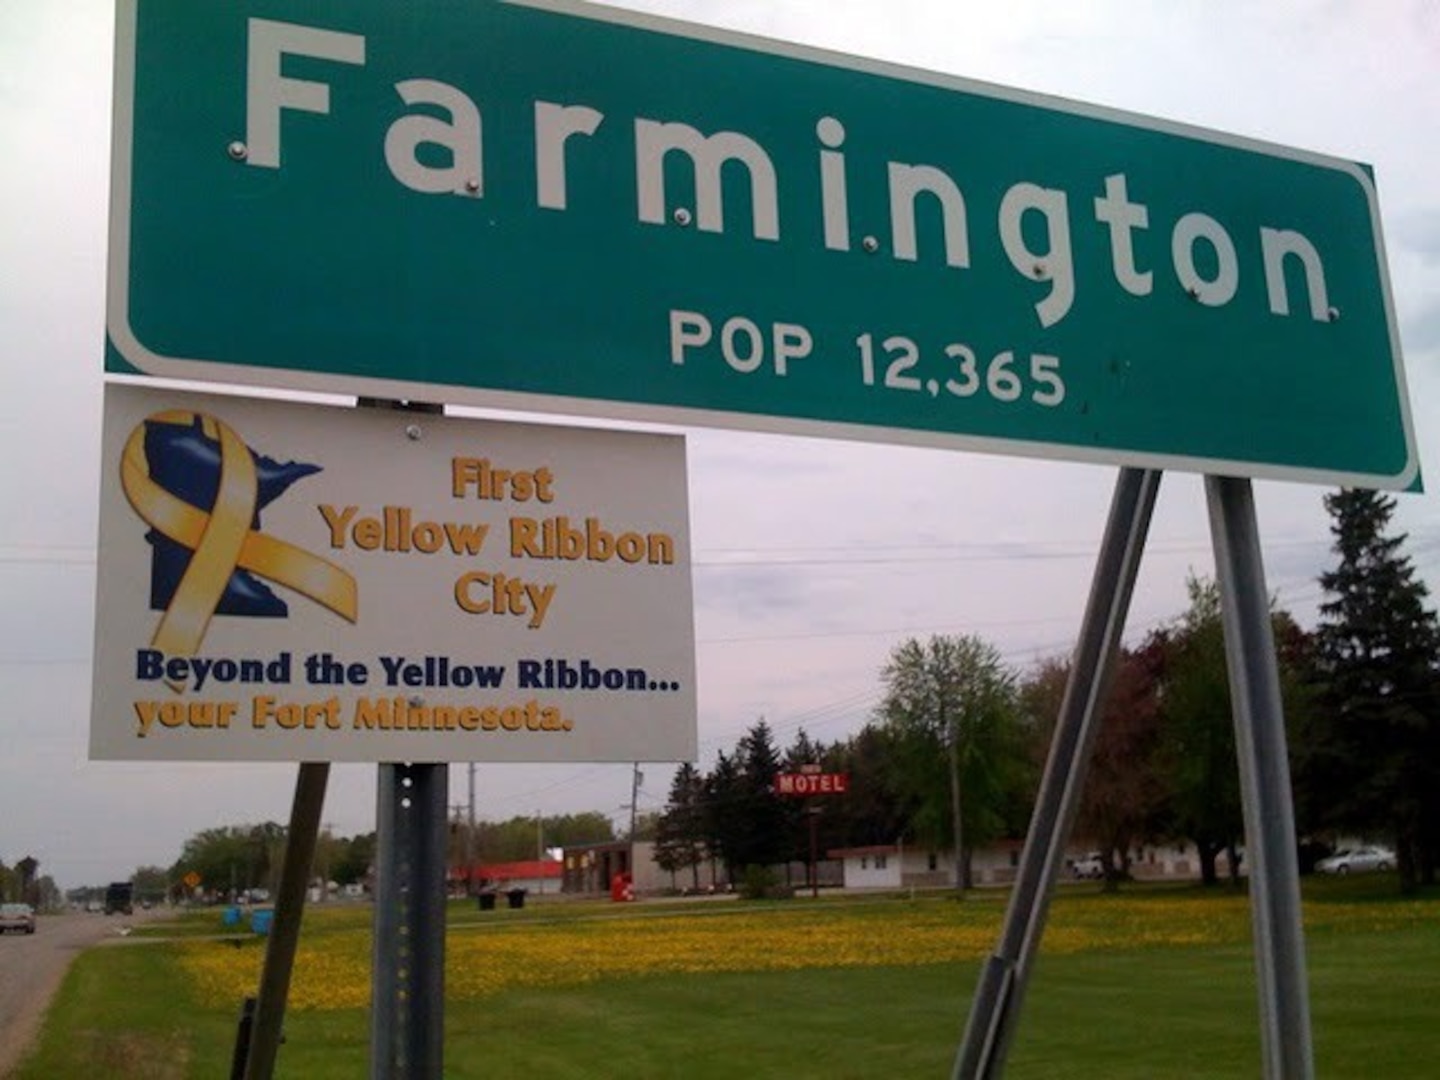 Farmington was the first community in Minnesota to earn the Yellow Ribbon network designation through the Minnesota National Guard's Beyond the Yellow Ribbon program. The designation is given to communities or groups that create a sustainable action plan to support troops and their families.